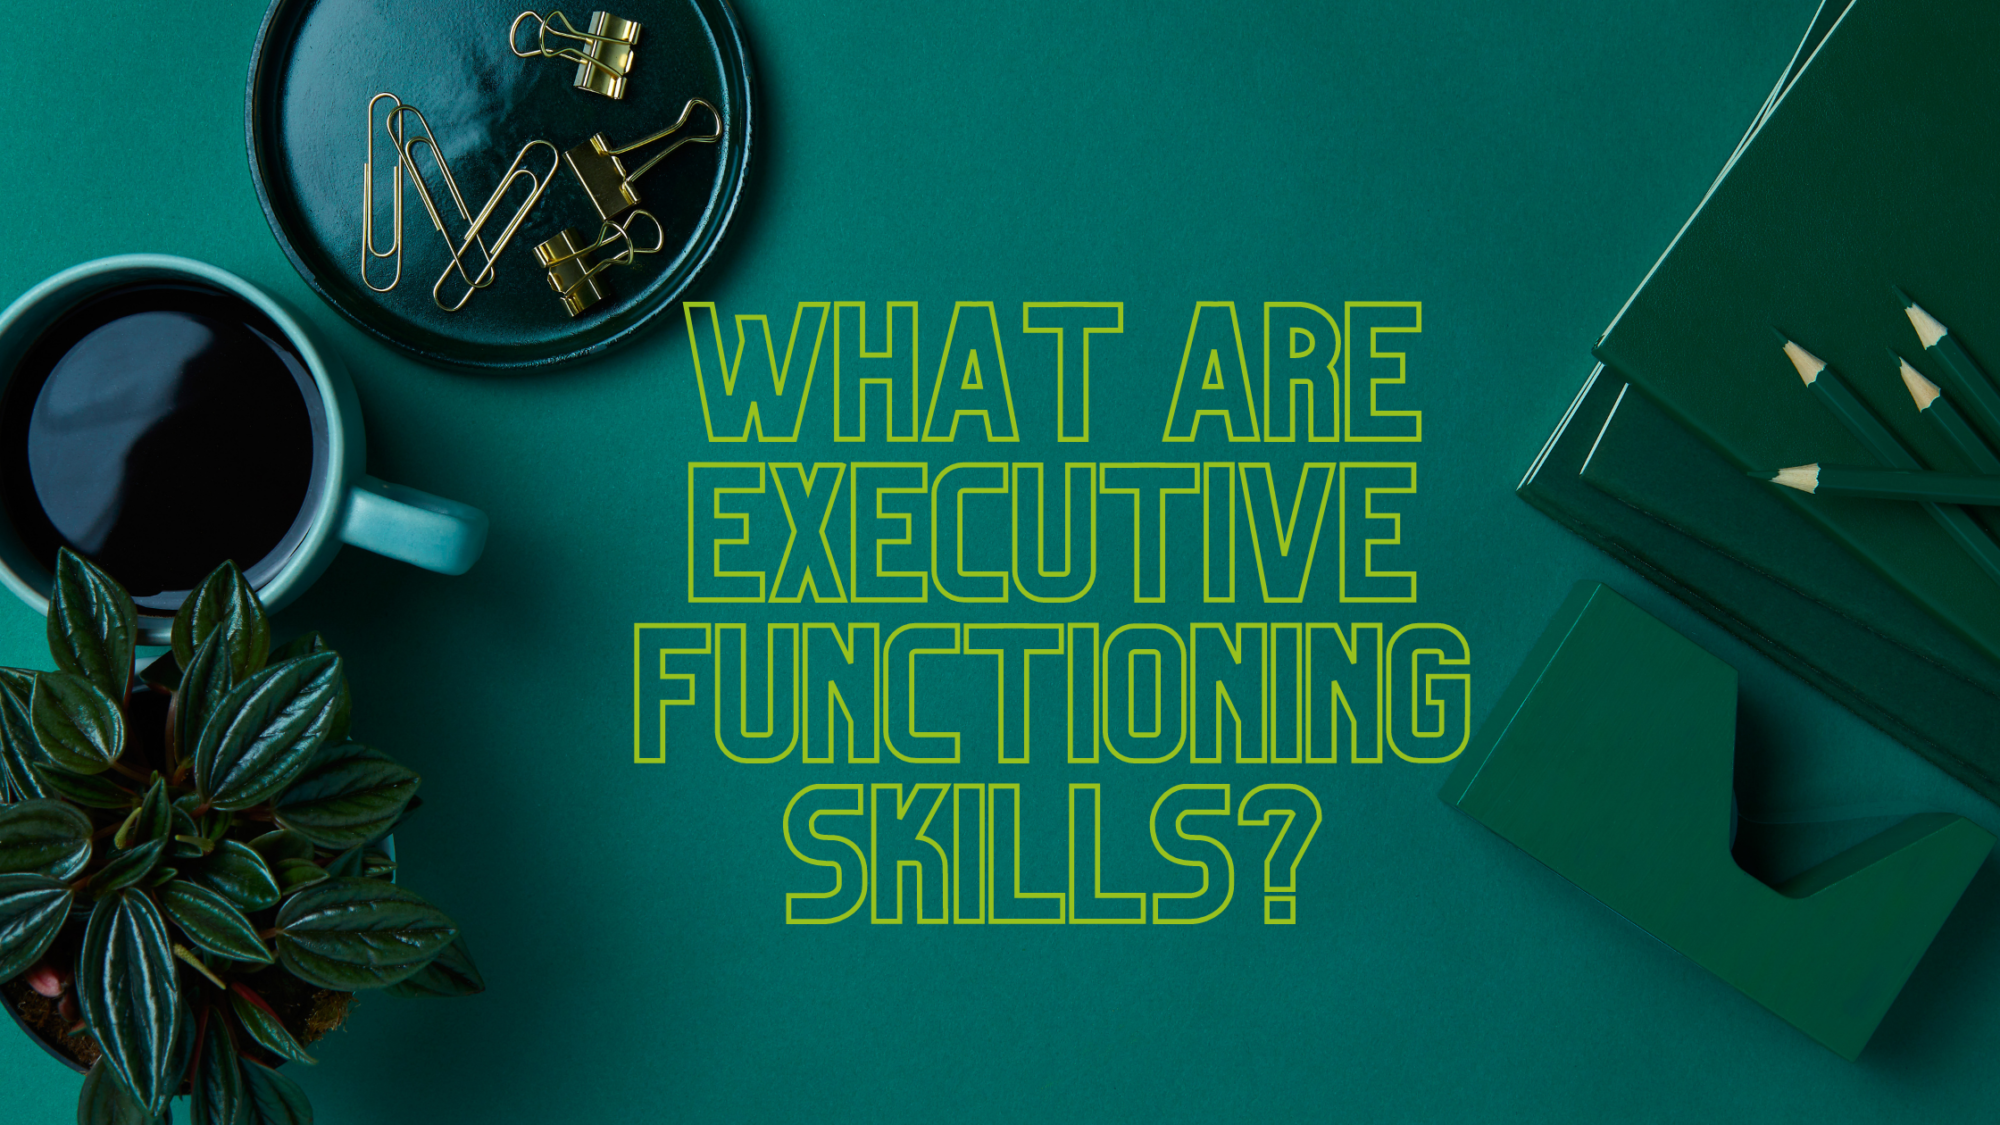 Title Banner: What are executive functioning skills